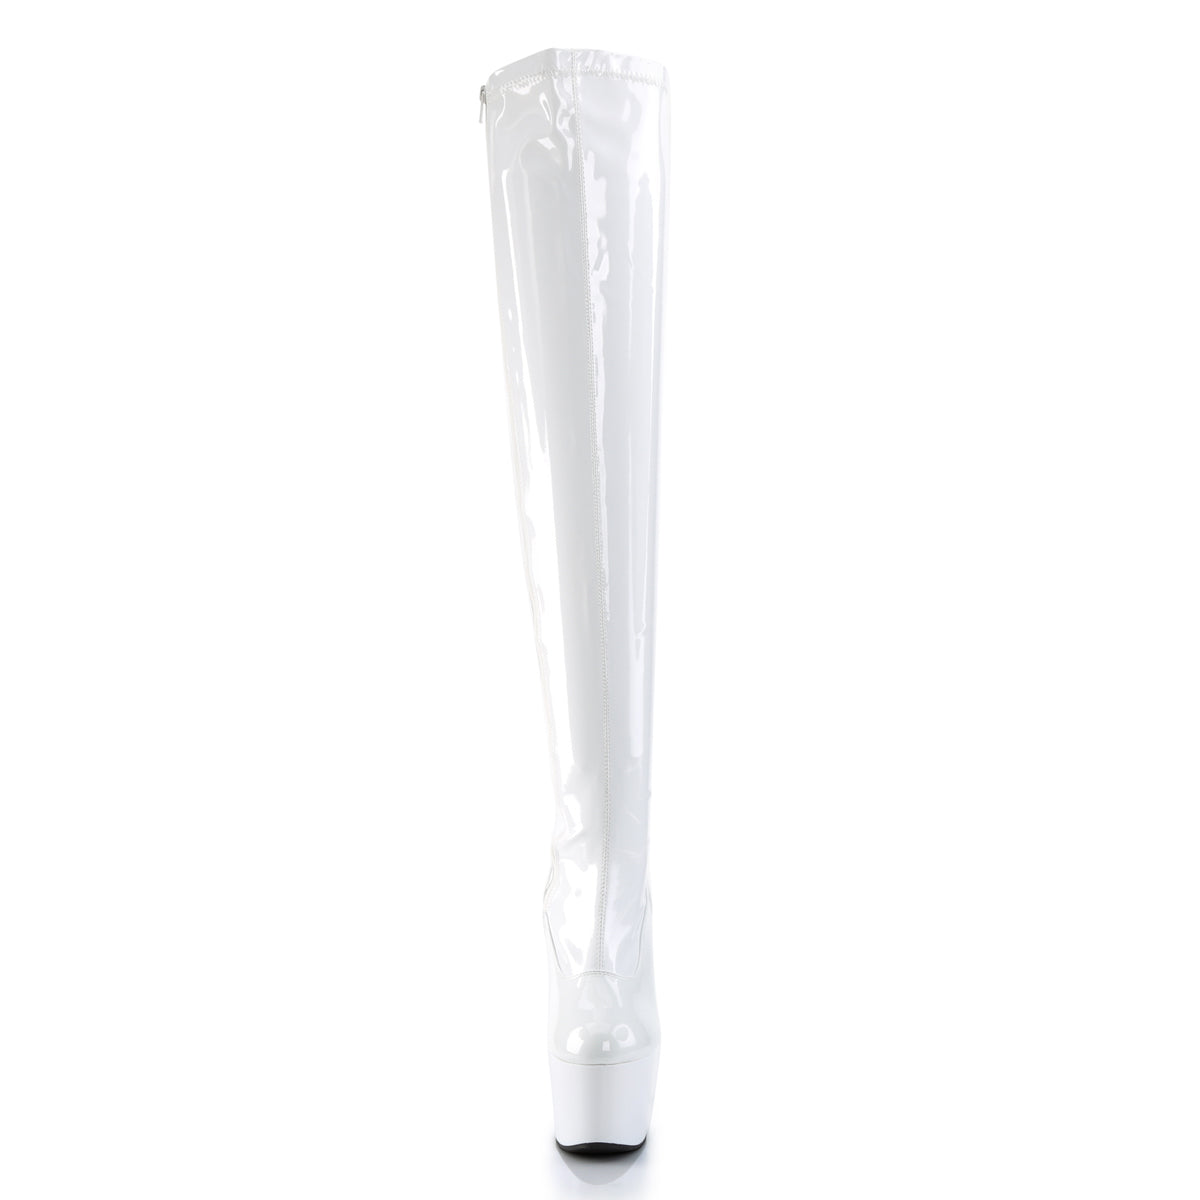 ADORE-3000 7 Inch Heel White Patent Pole Dancing Thigh Highs-Pleaser- Sexy Shoes Alternative Footwear